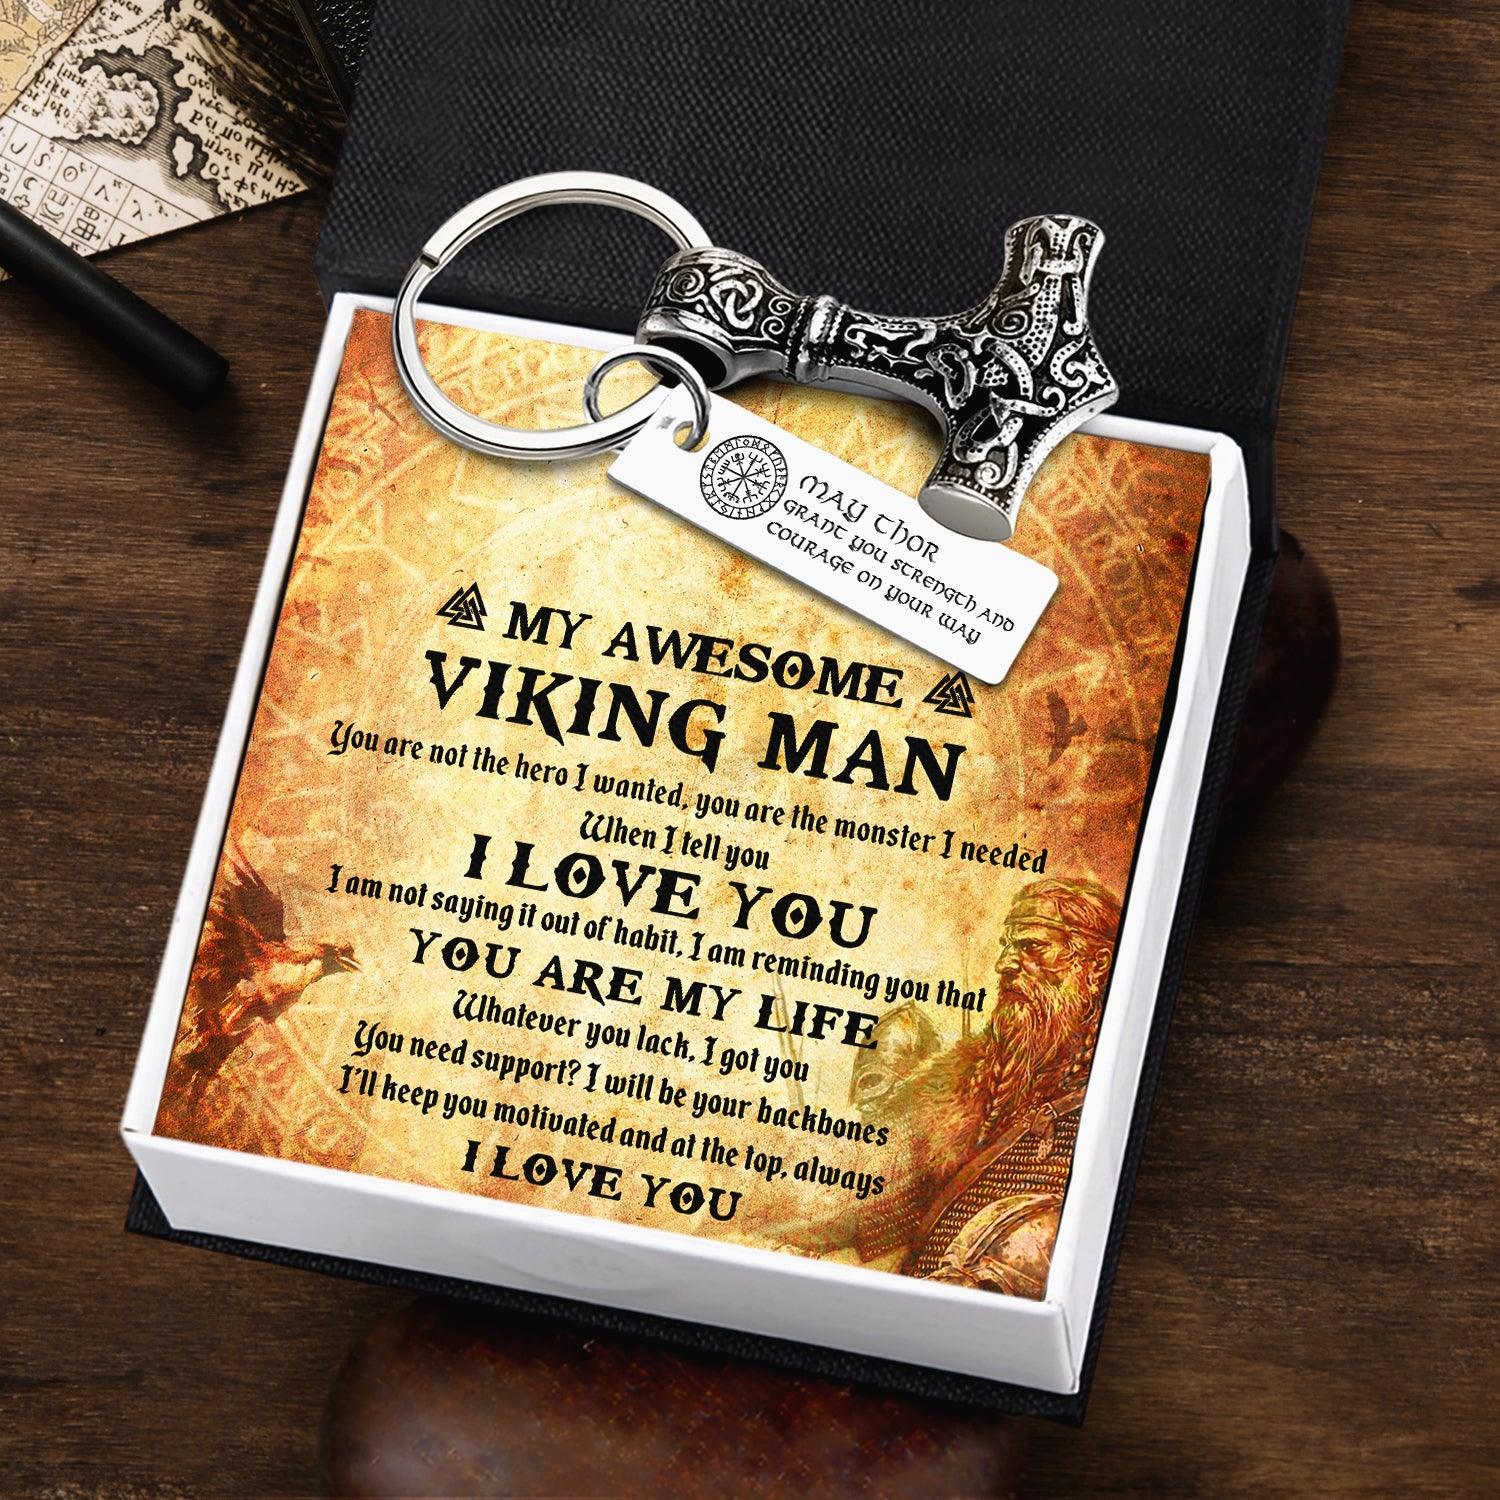 Viking Thor Keychain - My Awesome Viking Man - You Are the Monster I Needed - Augkbv26001 - Gifts Holder